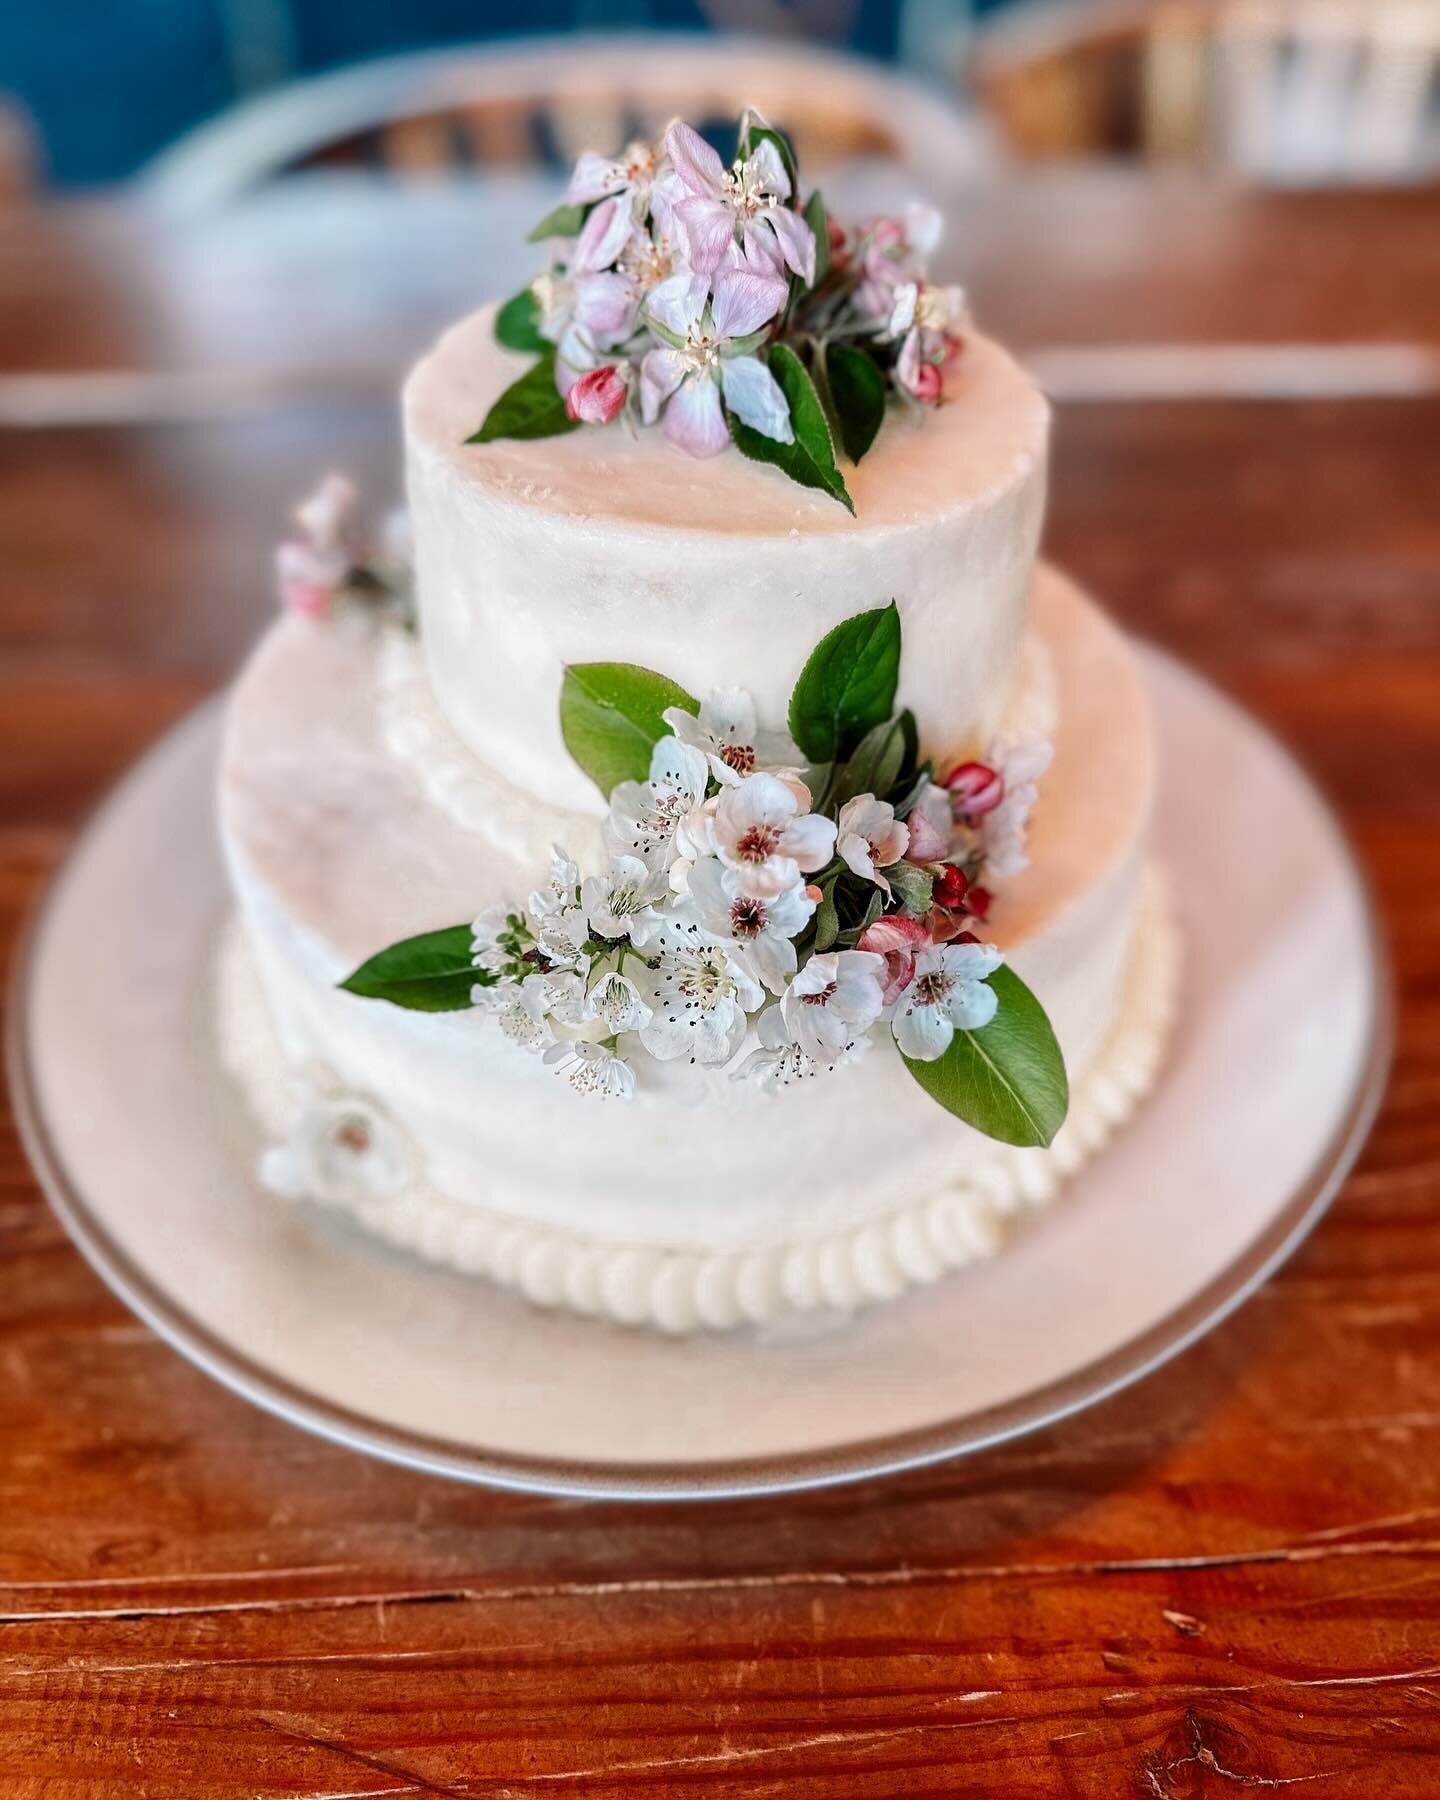 Celebrating our 14 year together anniversary so we had our wedding cake remade to celebrate 🤭😍

Valle day 2 photo dump with lots of great food and wine tasting 🍷🥂

#Valle #valledeguadalupe #vdg #valleasventure #happyplace #wine #foodie #foodiedre